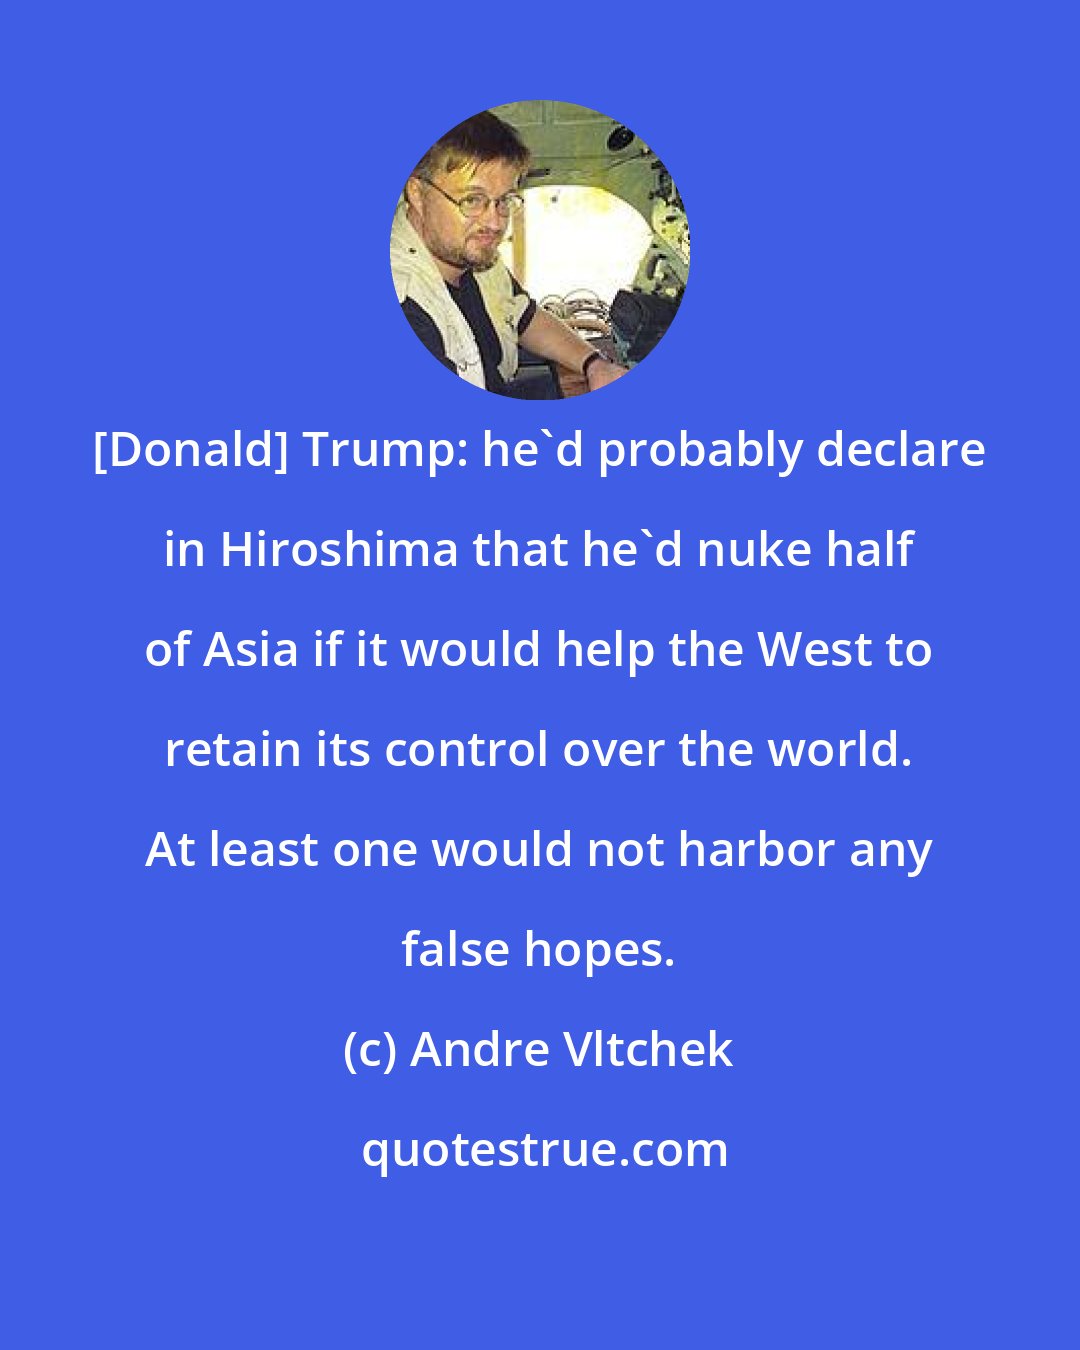 Andre Vltchek: [Donald] Trump: he'd probably declare in Hiroshima that he'd nuke half of Asia if it would help the West to retain its control over the world. At least one would not harbor any false hopes.